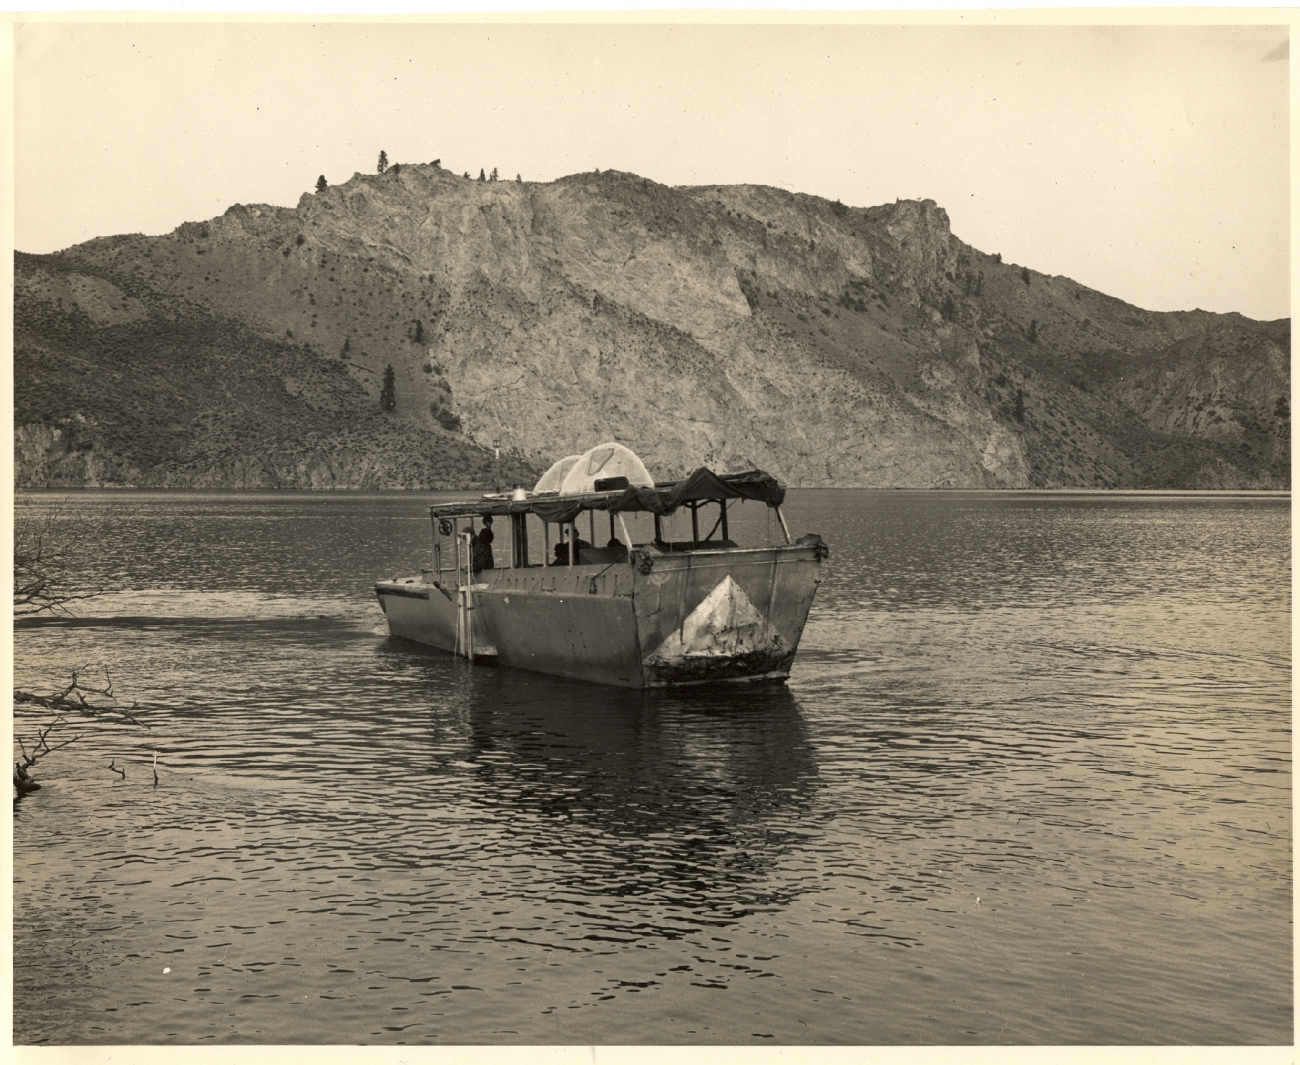 Makeshift survey launch operating on Lake Roosevelt, the Grand Coulee Dam